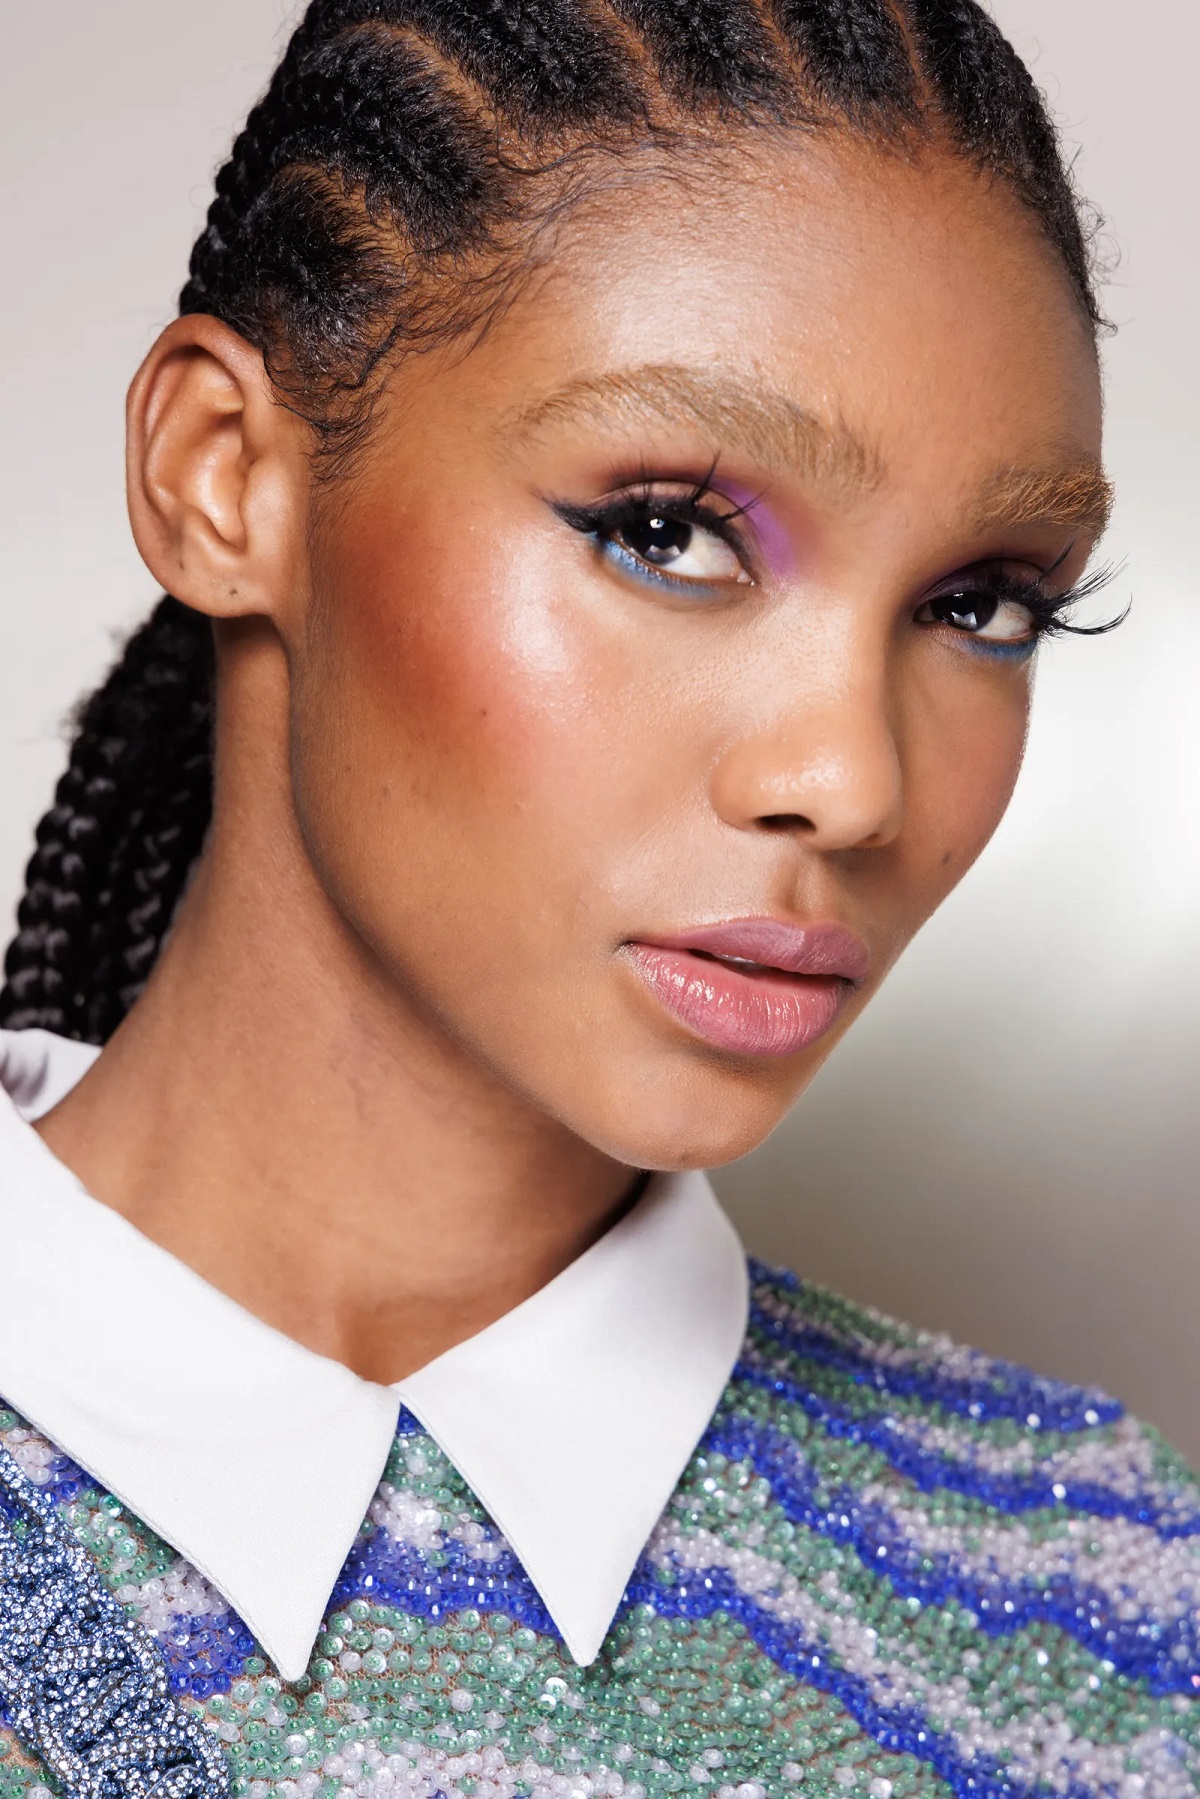 Set aside your black liner for something more colorful